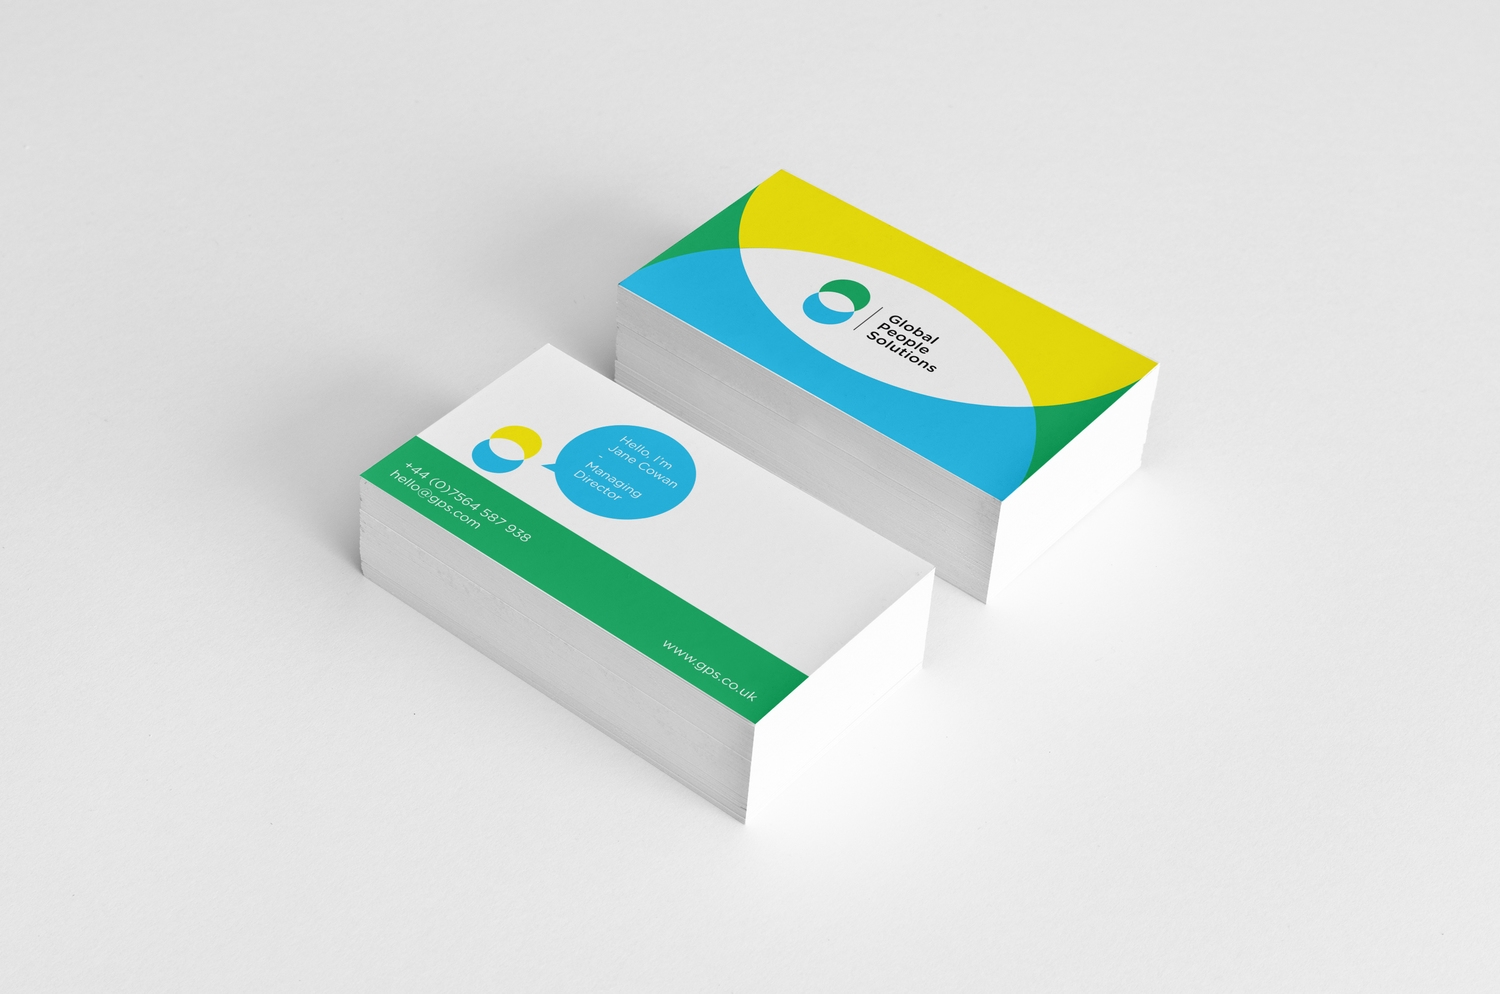 Freelance-graphic-designer-Two stacks of Global People Solutions business cards in platinum background